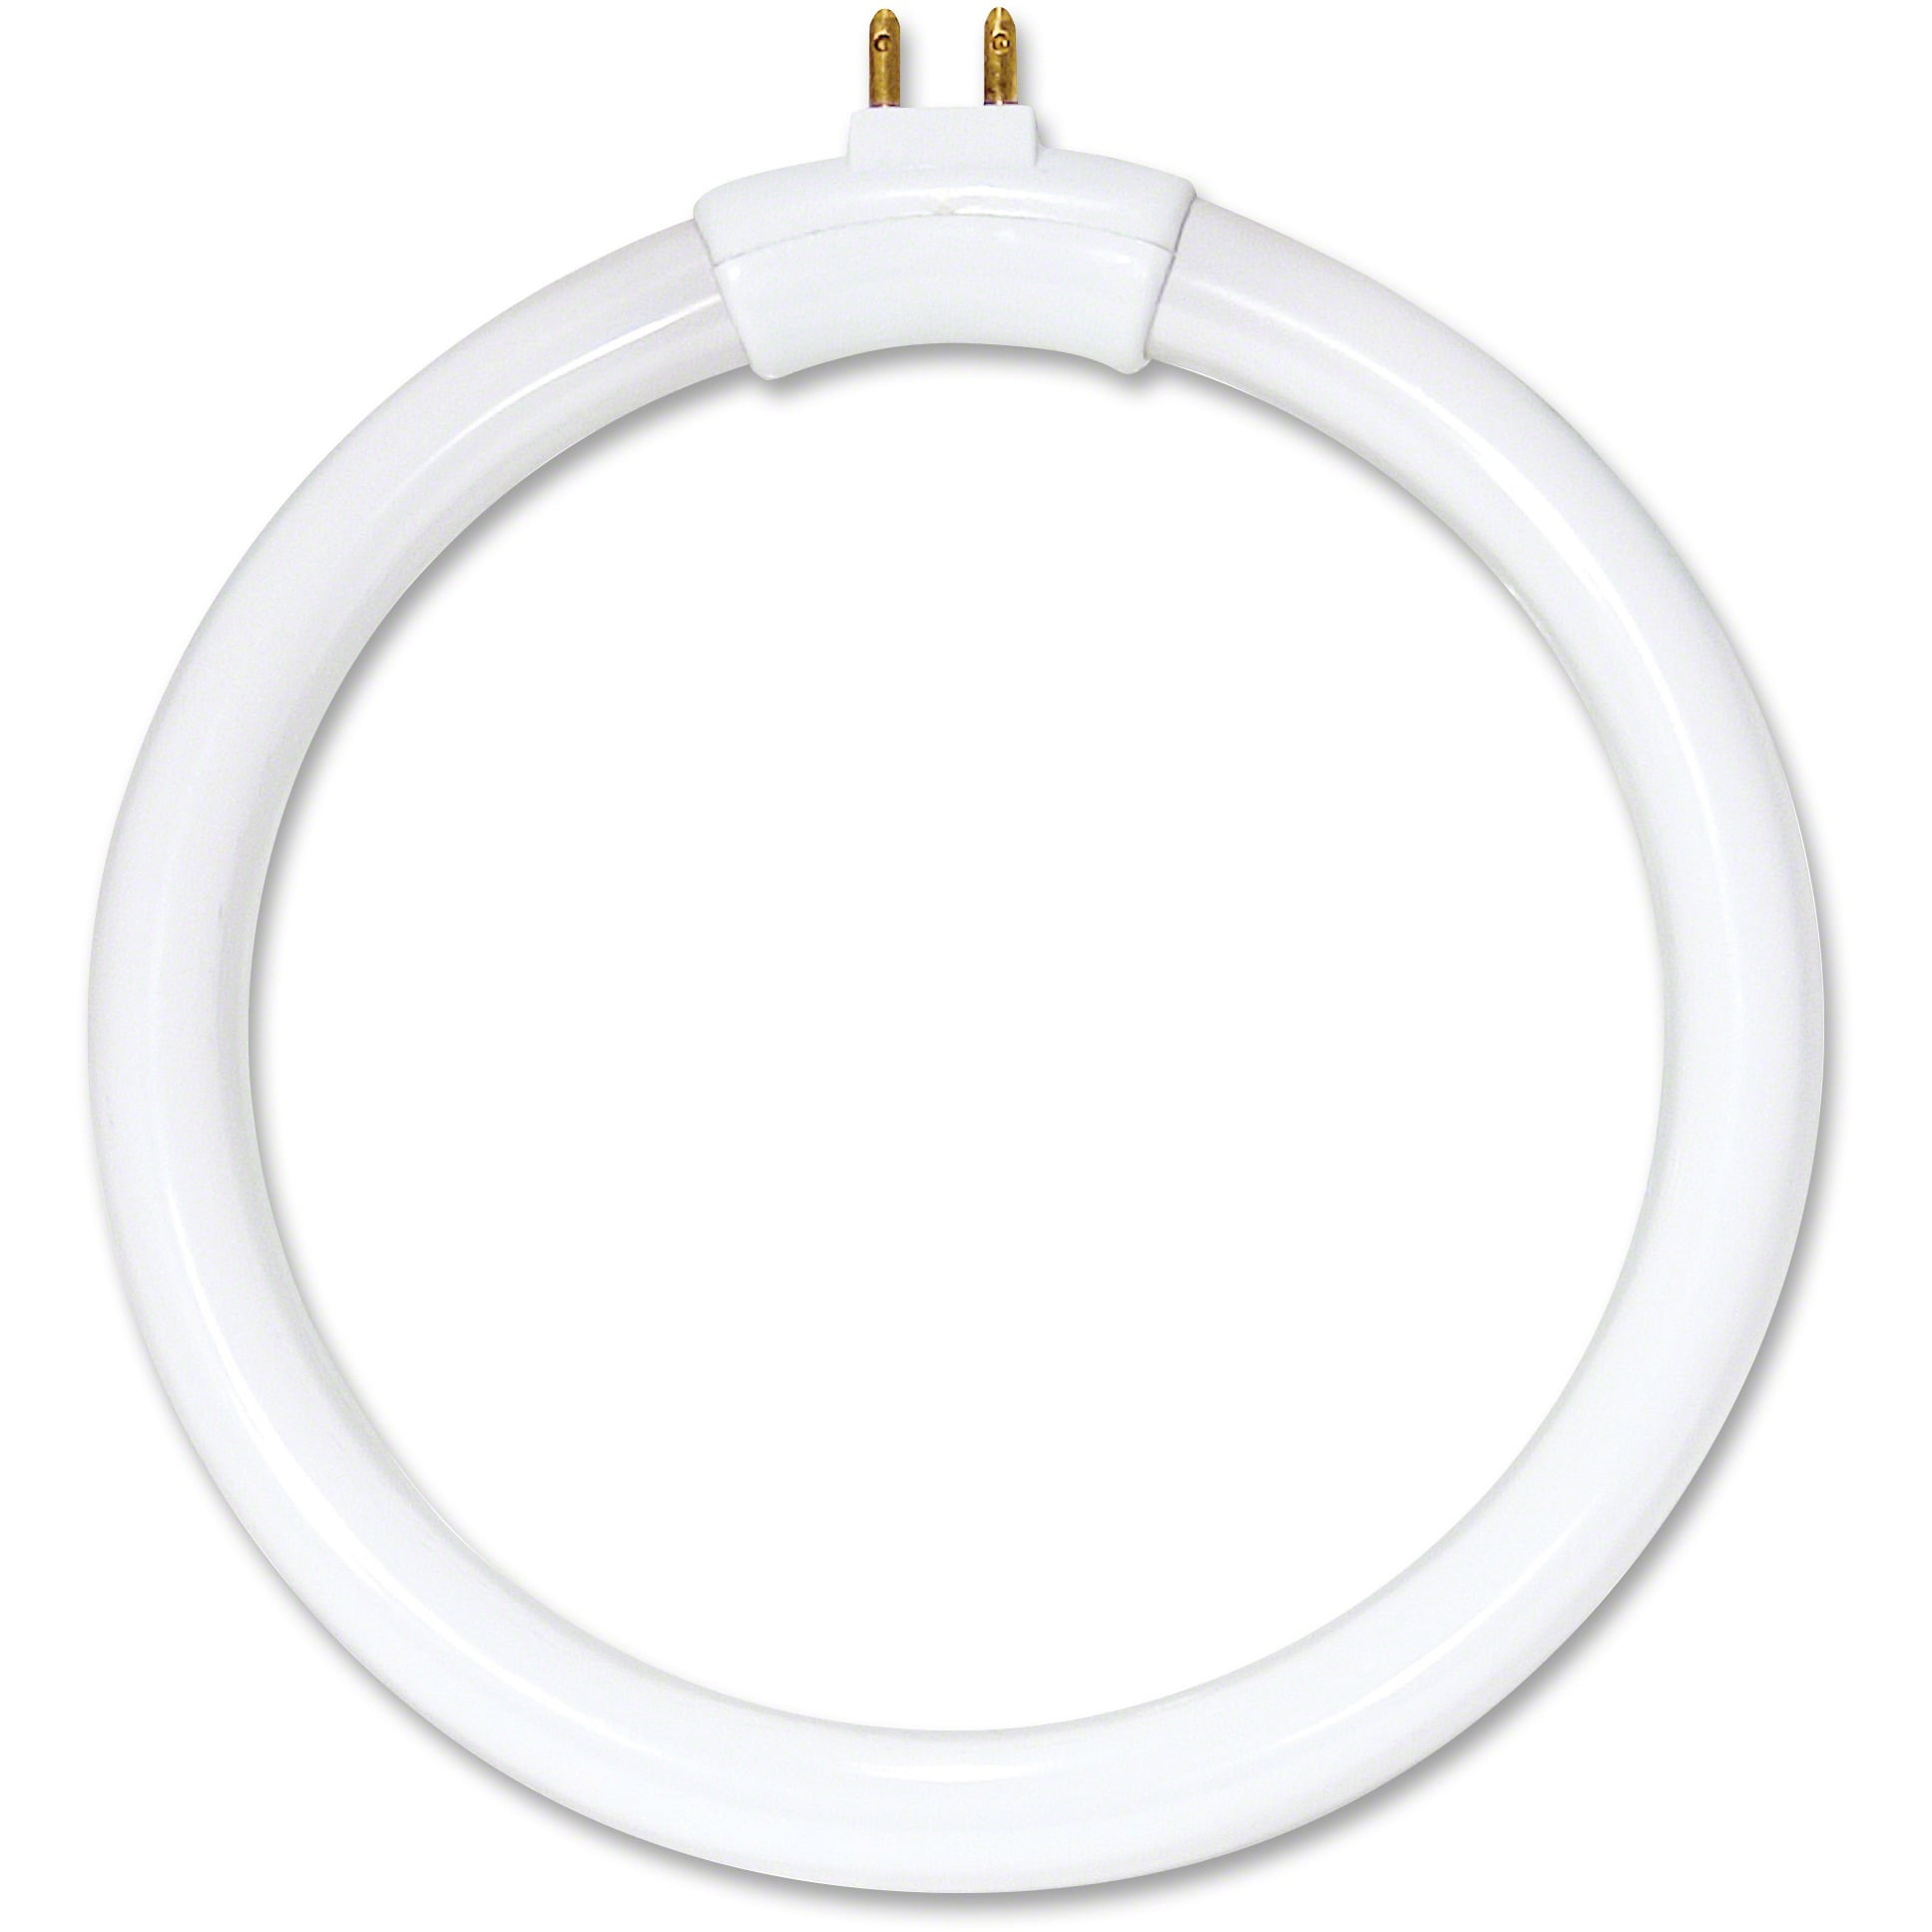 REPLACEMENT BULB FOR LIGHT BULB LAMP FC12T4/865 12W